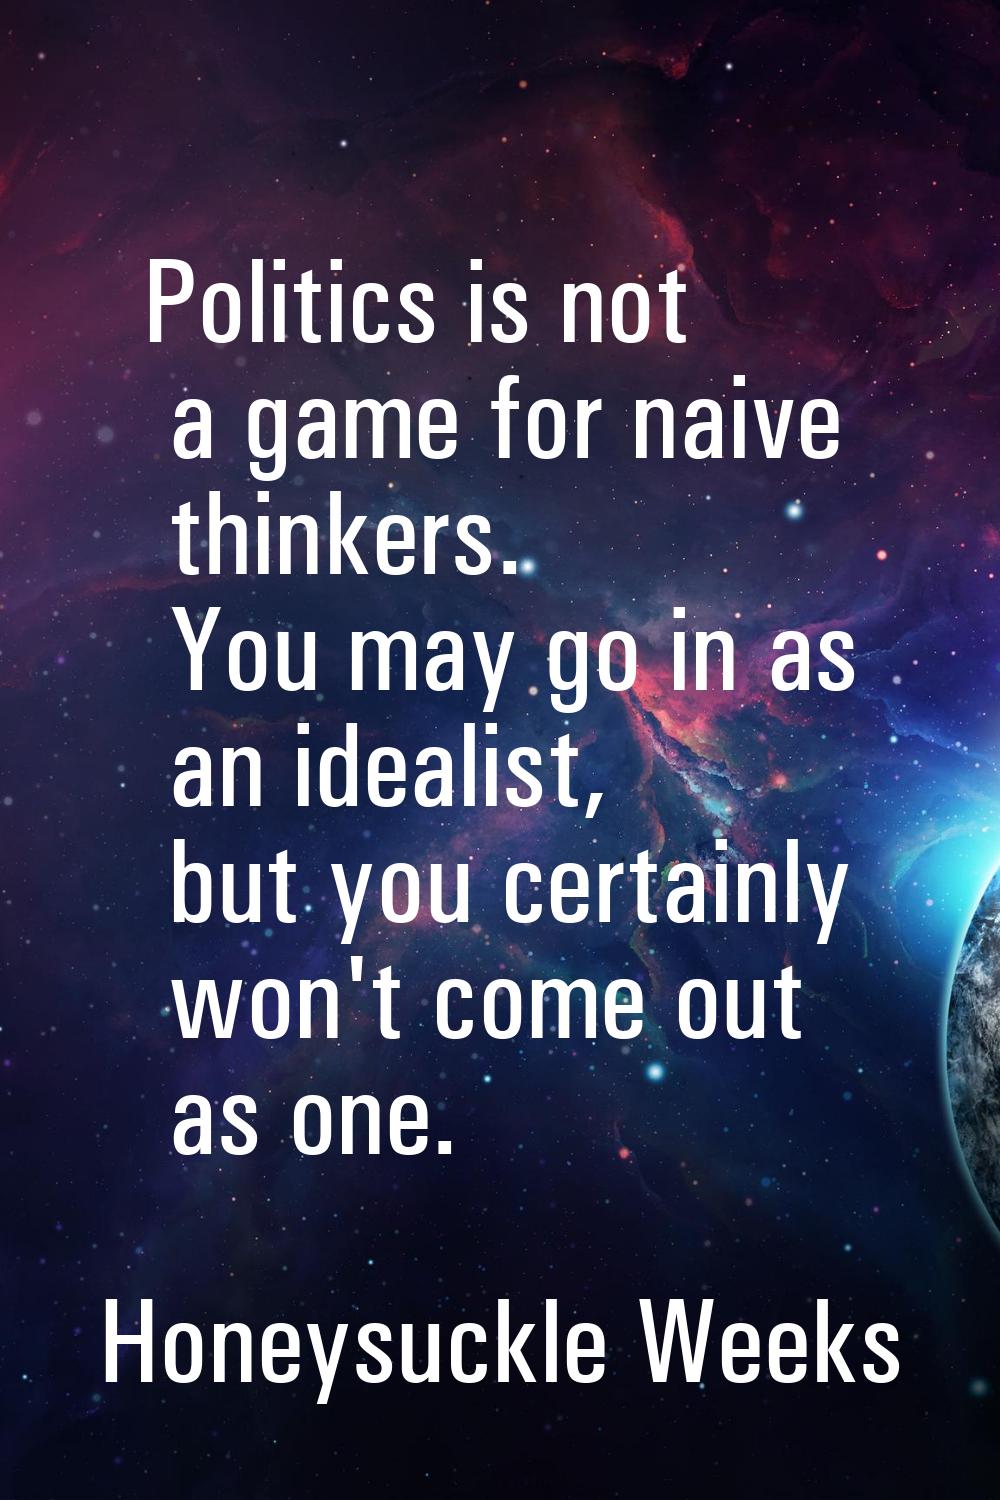 Politics is not a game for naive thinkers. You may go in as an idealist, but you certainly won't co